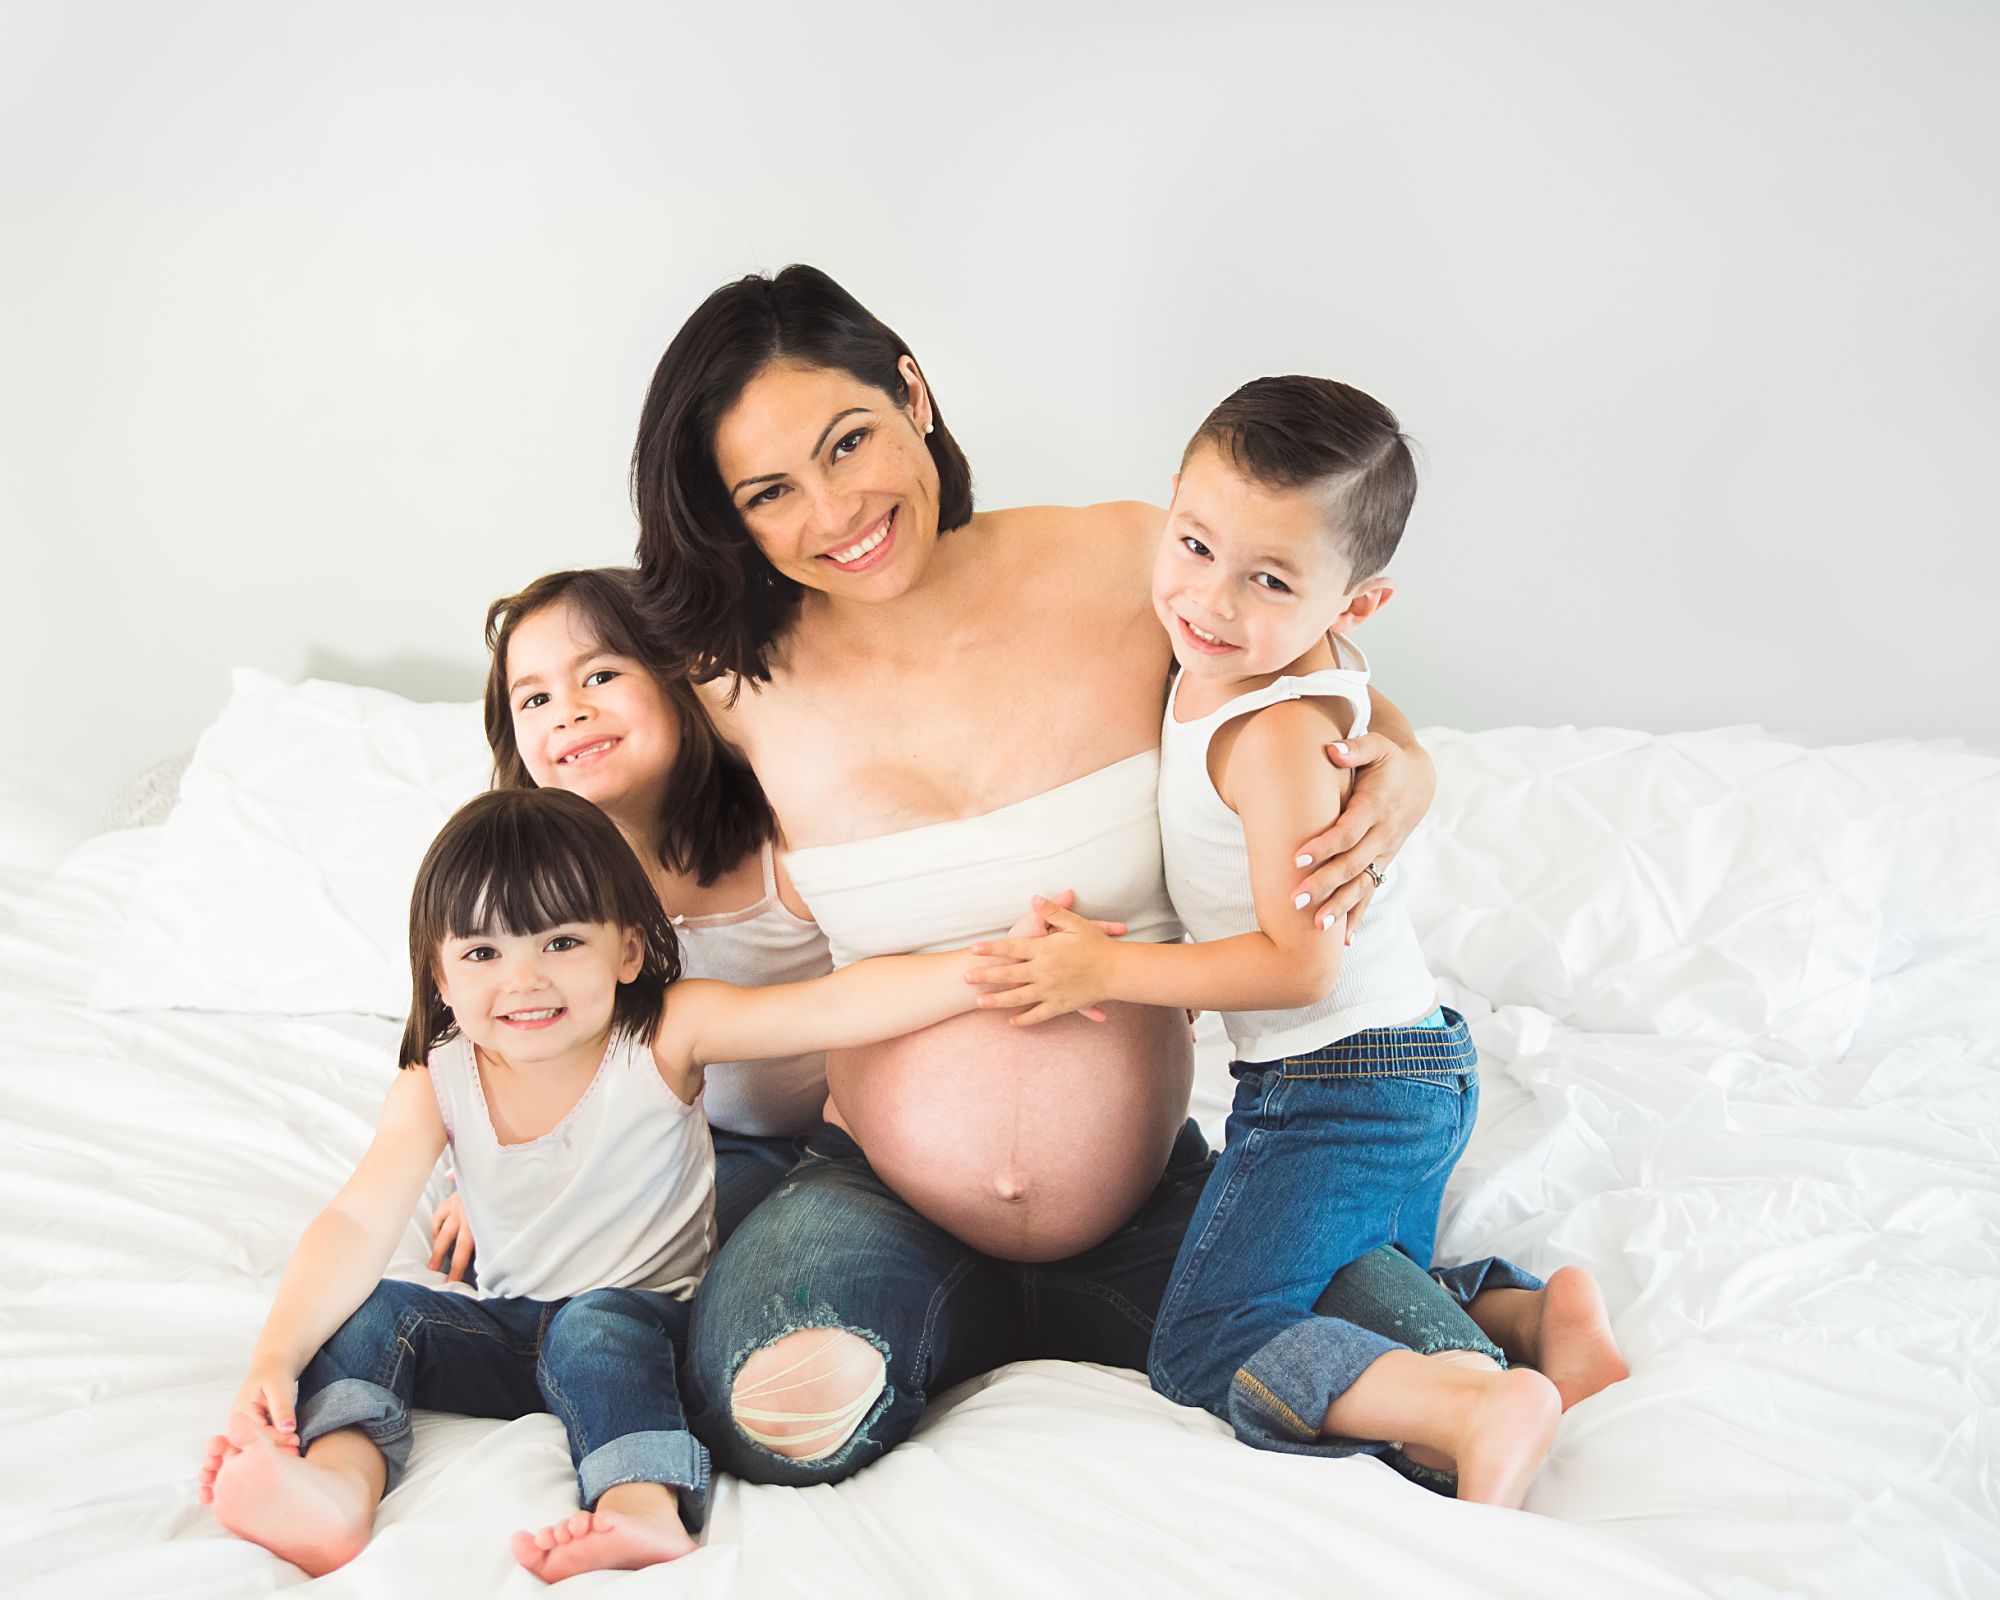 Mommy and me family maternity photo indoor session with three children wearing blue jeans and white shirts